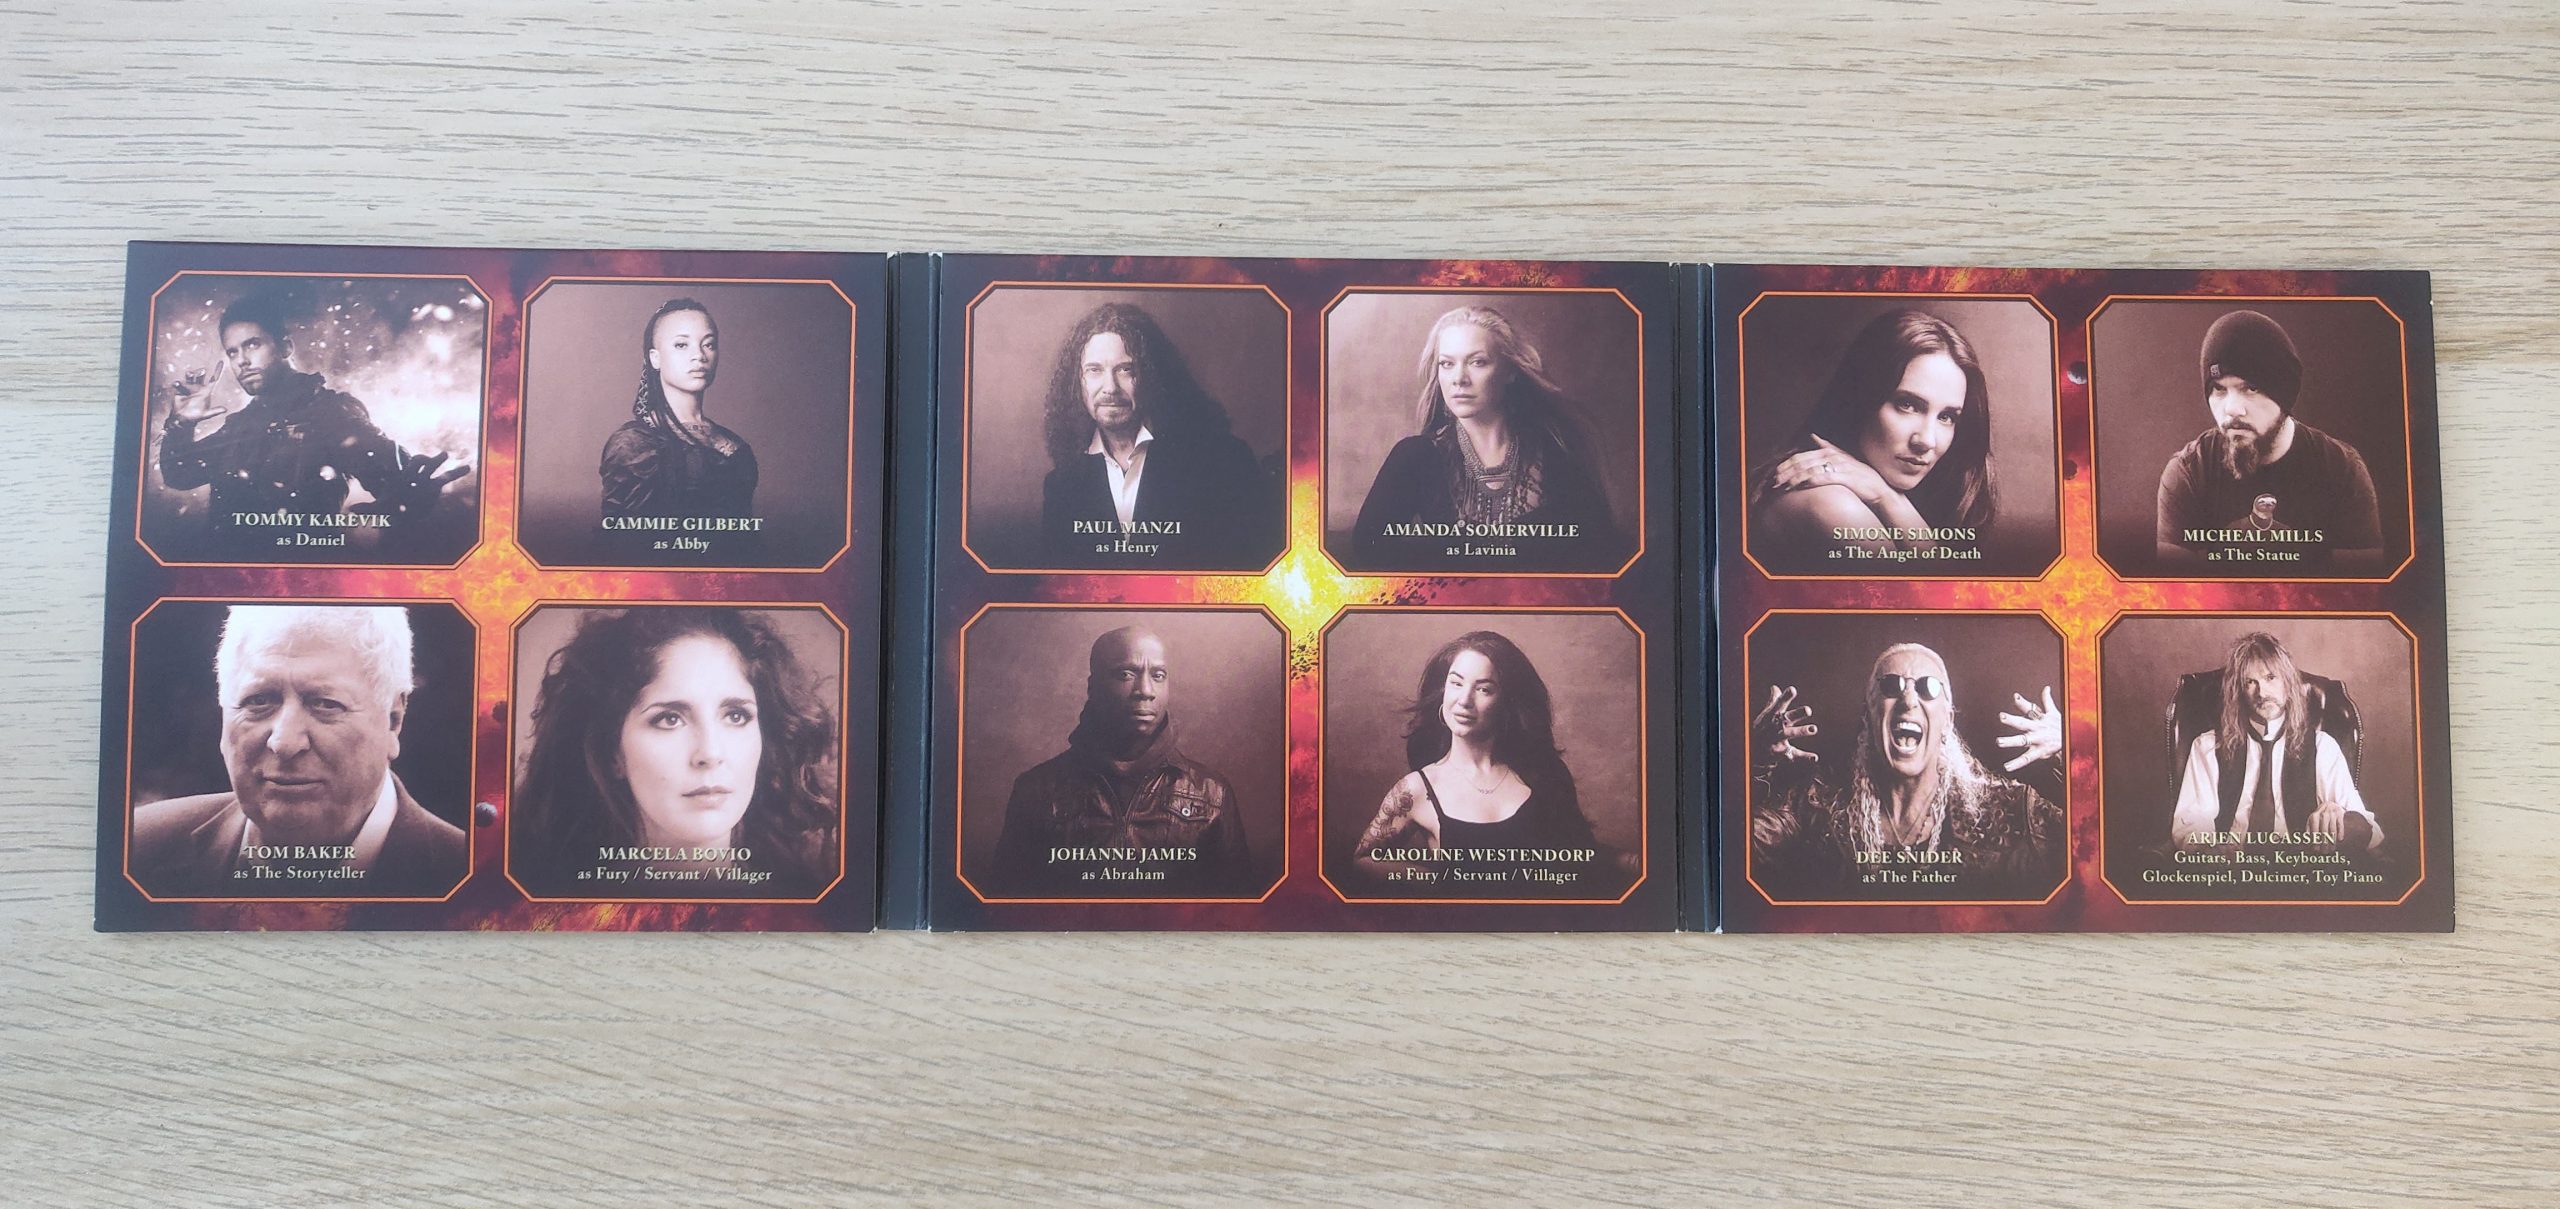 Inside the physical copy of the album showing headshots of some of the featured musicians